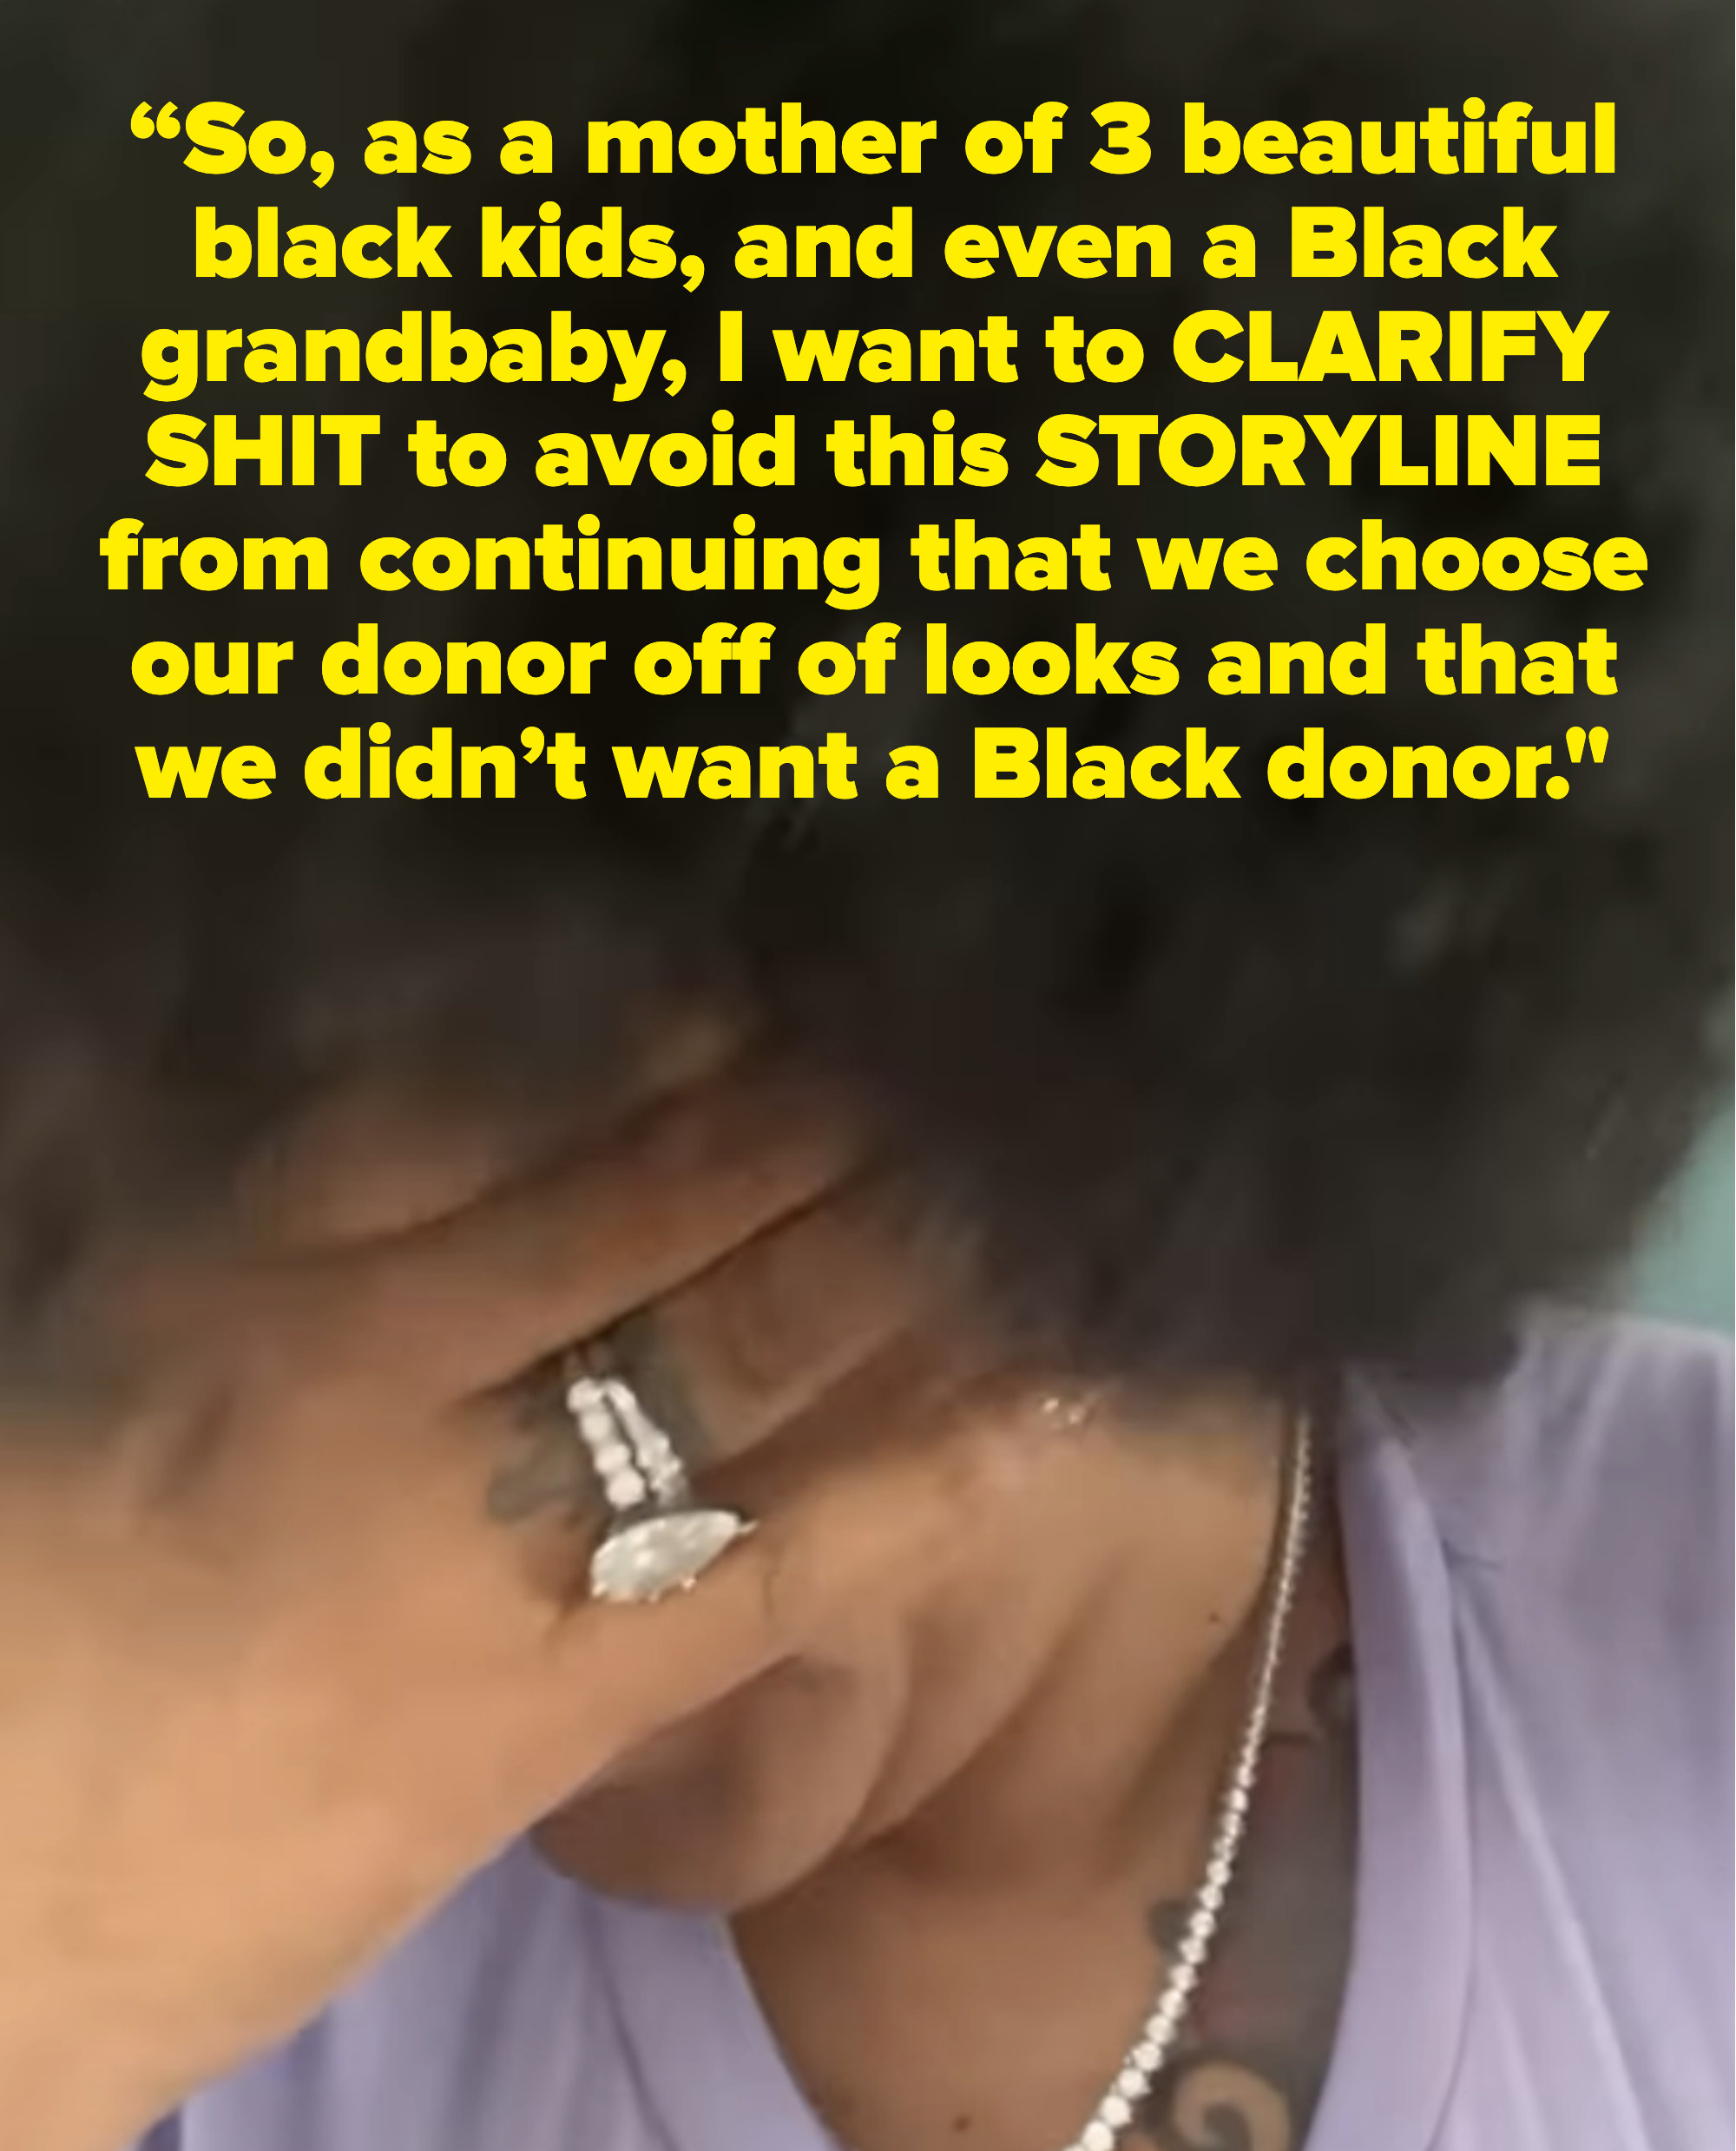 Judy says that she wants to clarify that they didn&#x27;t choose their donor based on looks and accusations that they didn&#x27;t want a Black donor